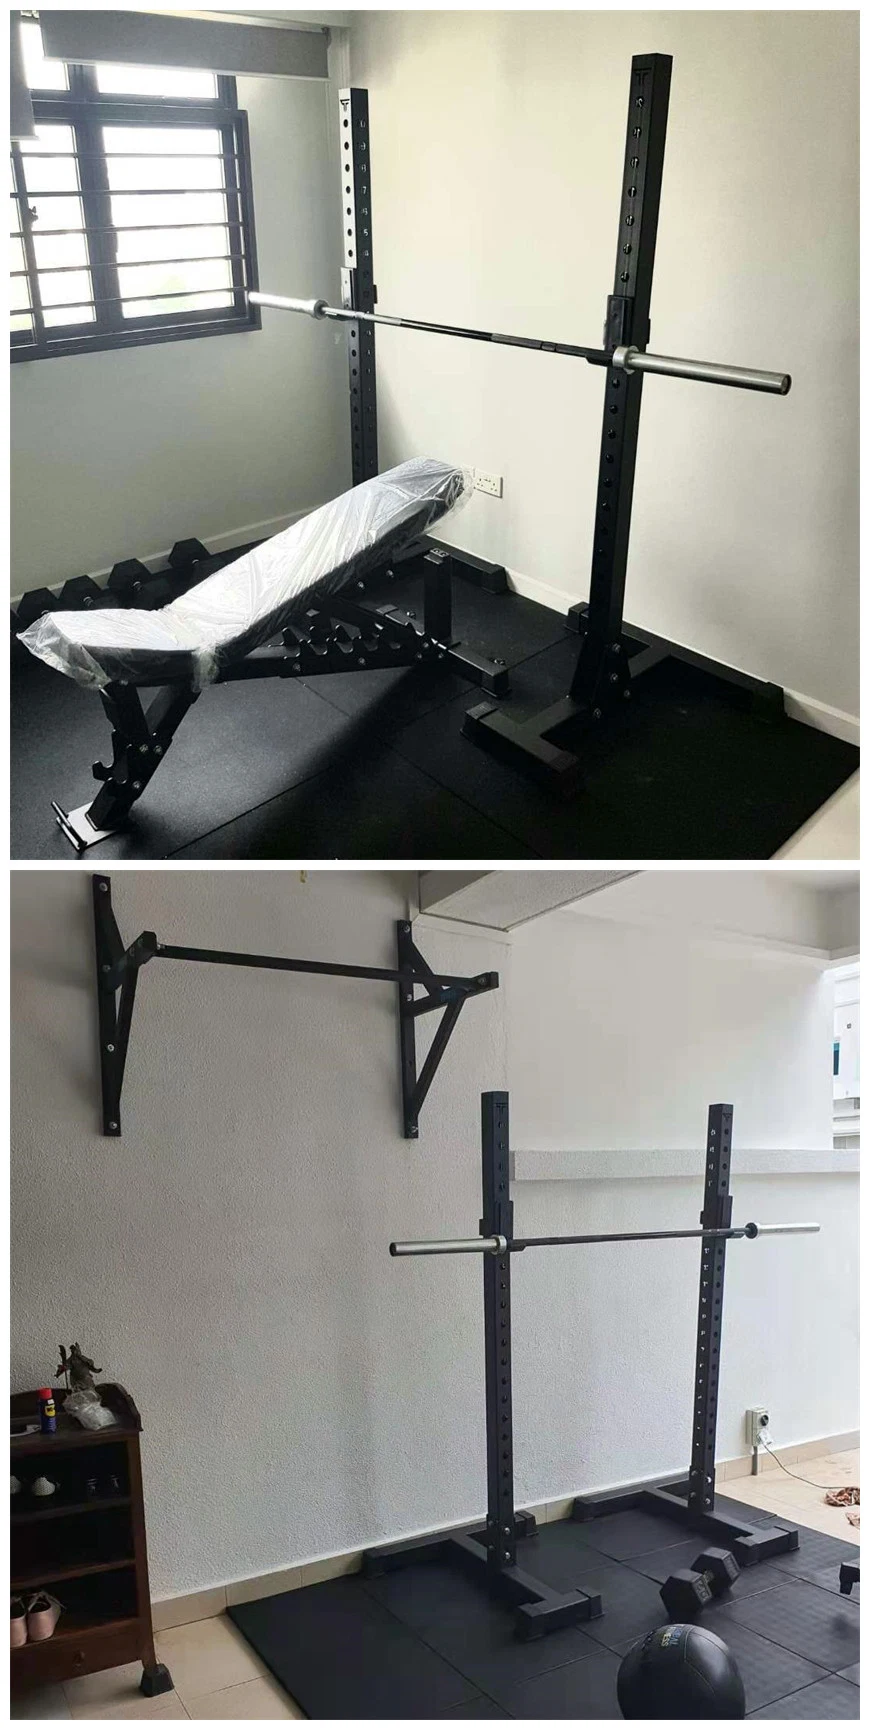 High Quality Gym Equipment Adjustable Weight Lifting Fitness Power Rack Weightlifting Squat Rack Stand Split Power Rack Squat Rack Stand